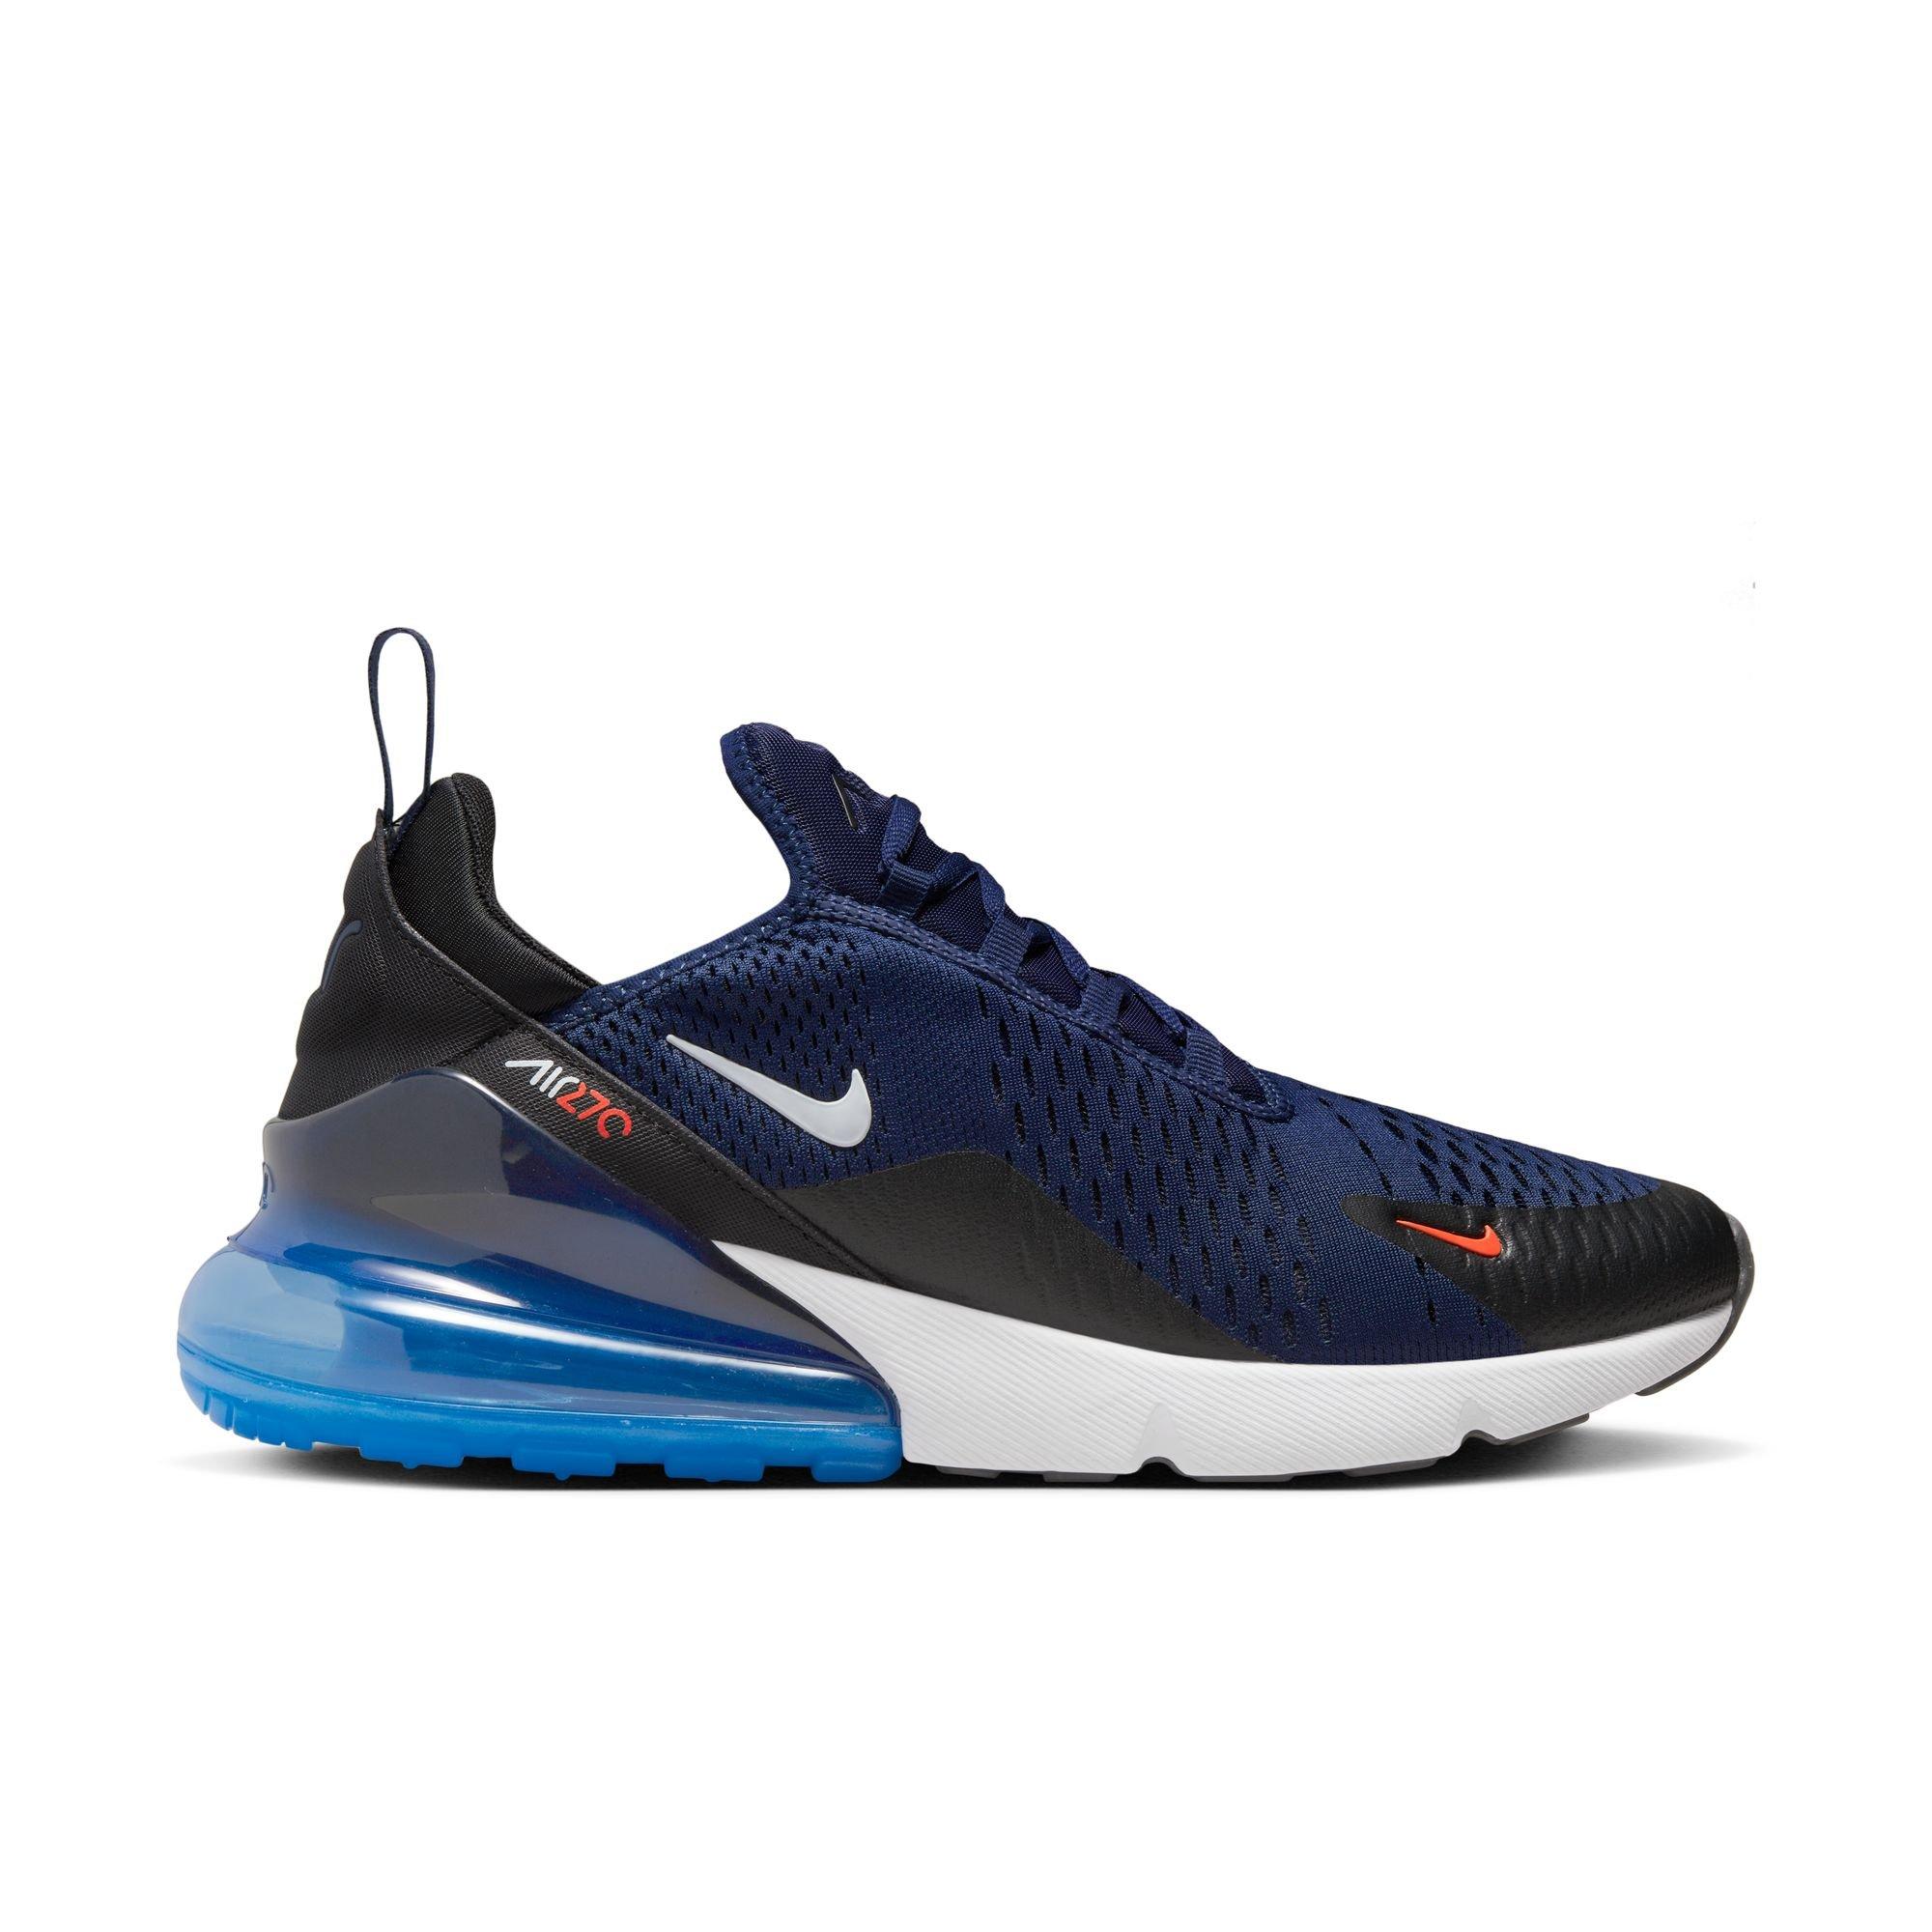 Nike Air Max 270 White Midnight Navy DH0613-100 Release Info